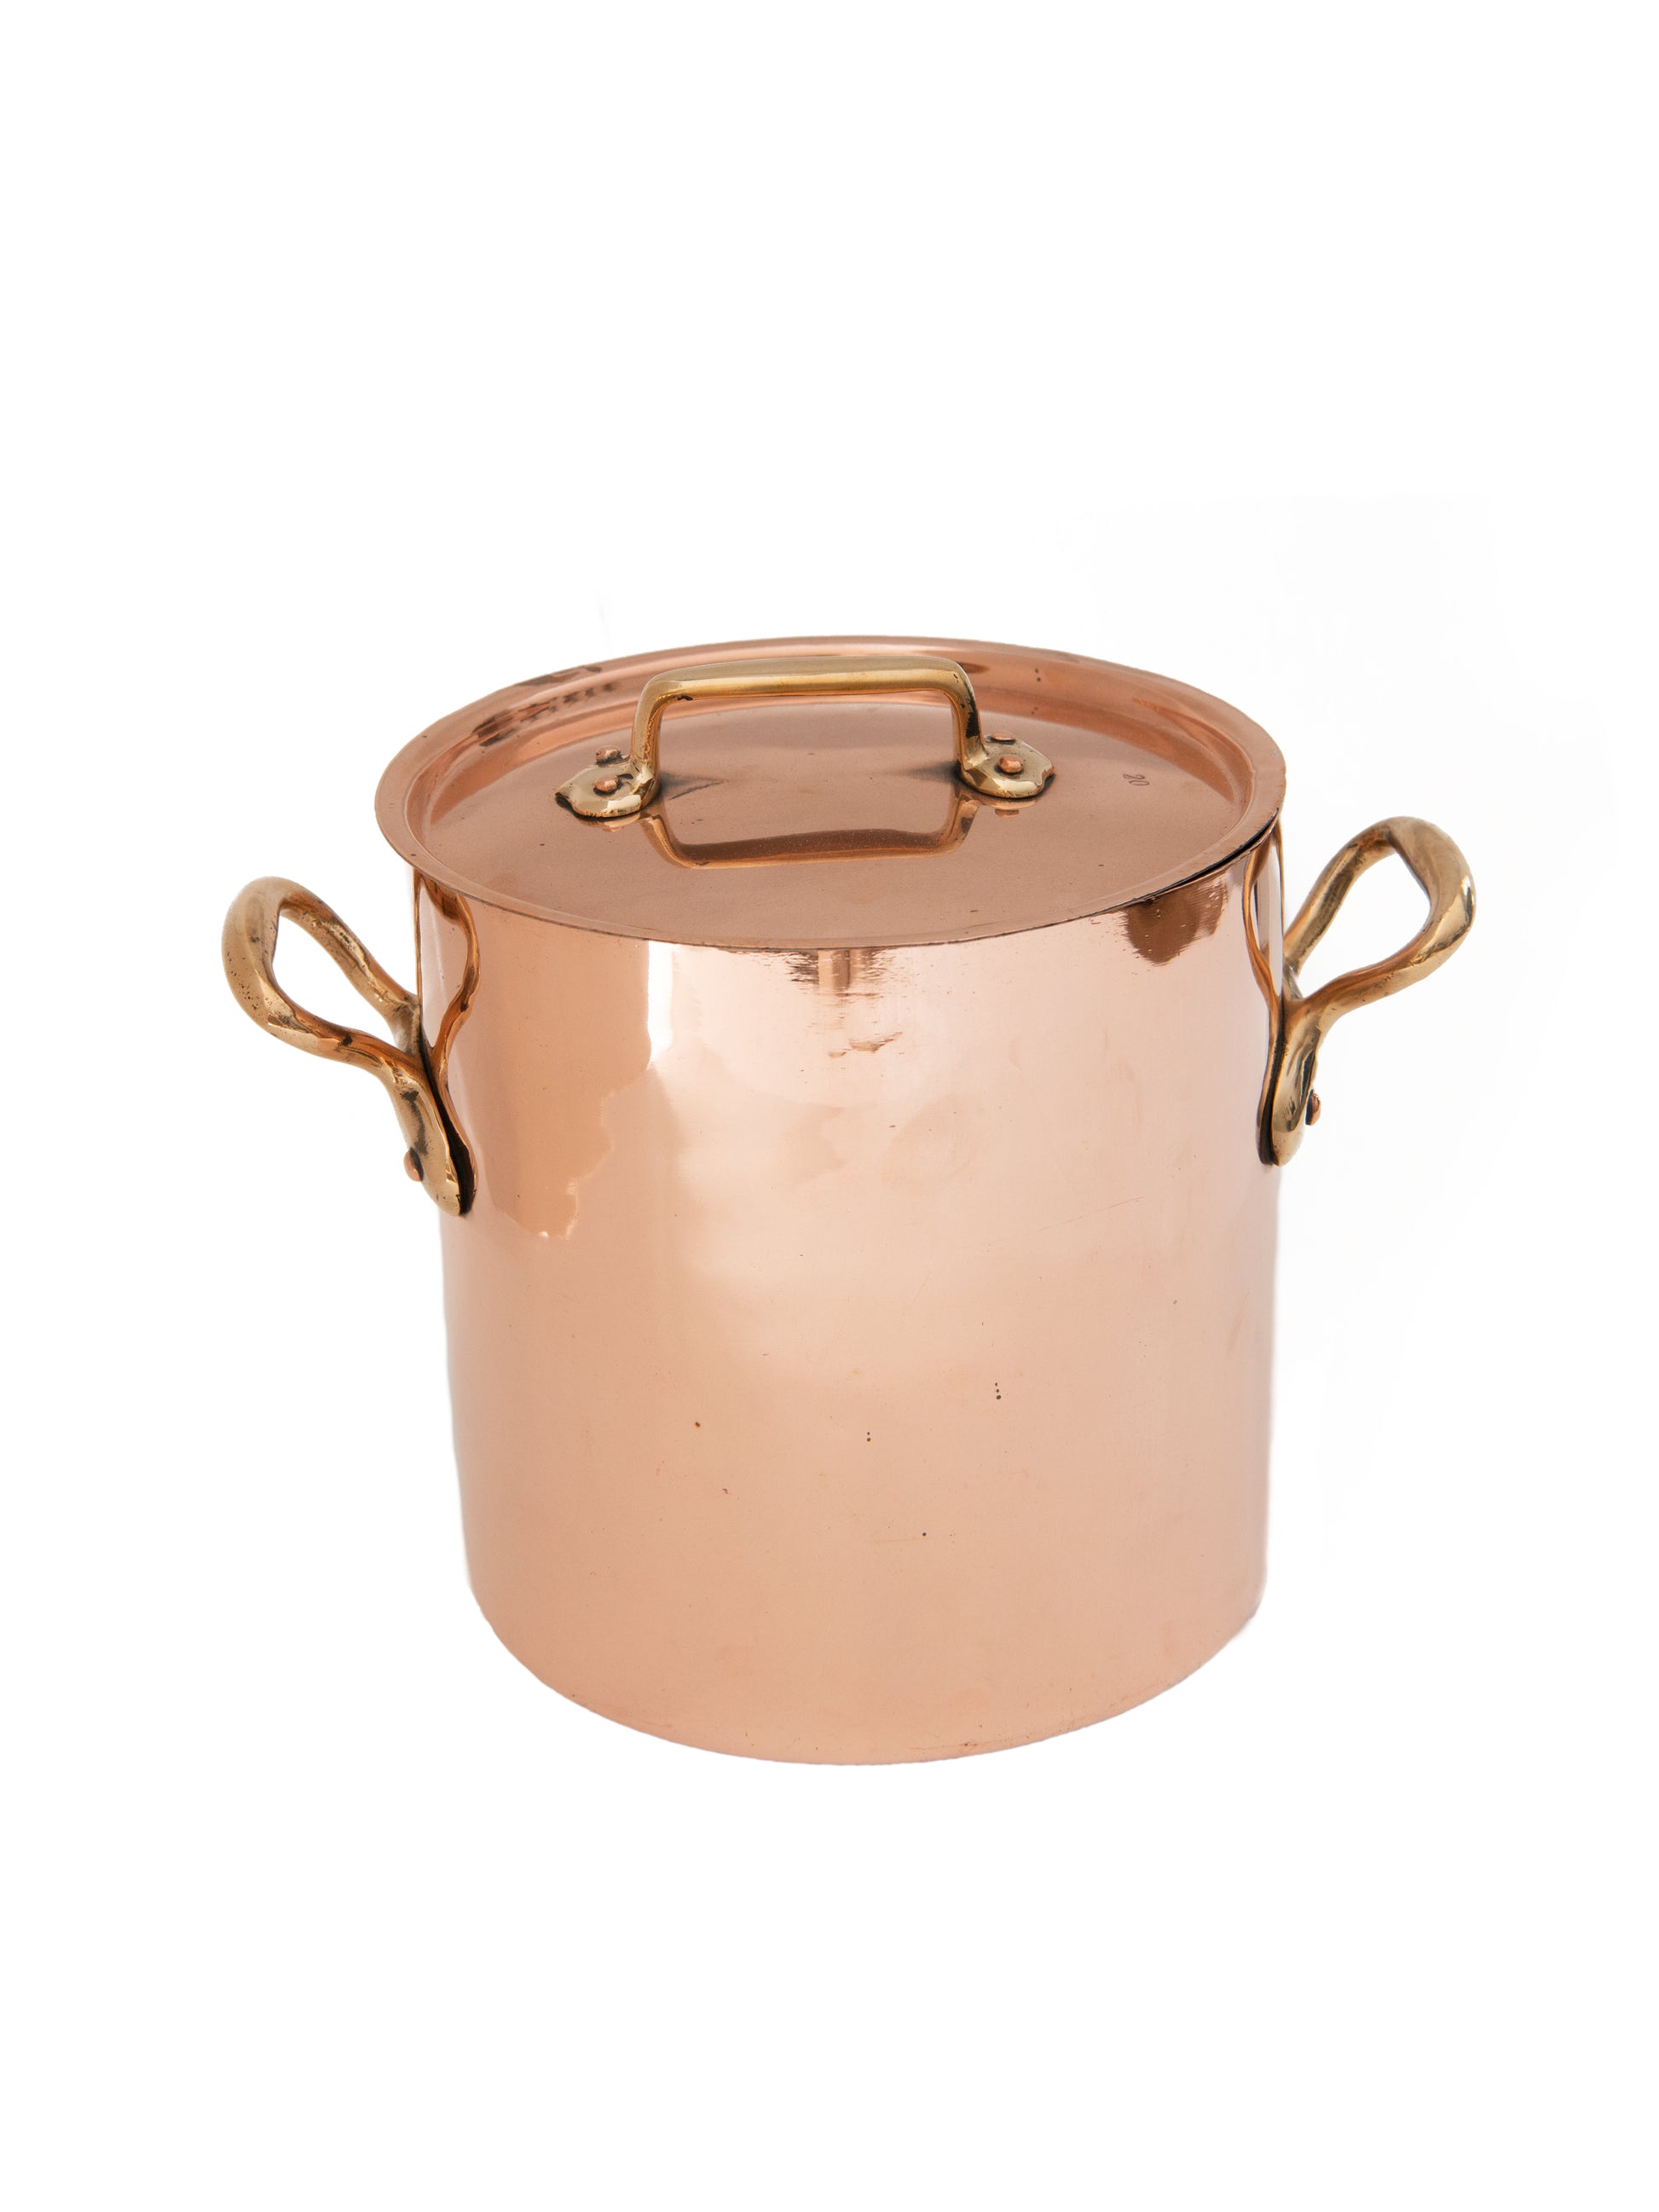 1880s Small French Copper Stockpot with Lid